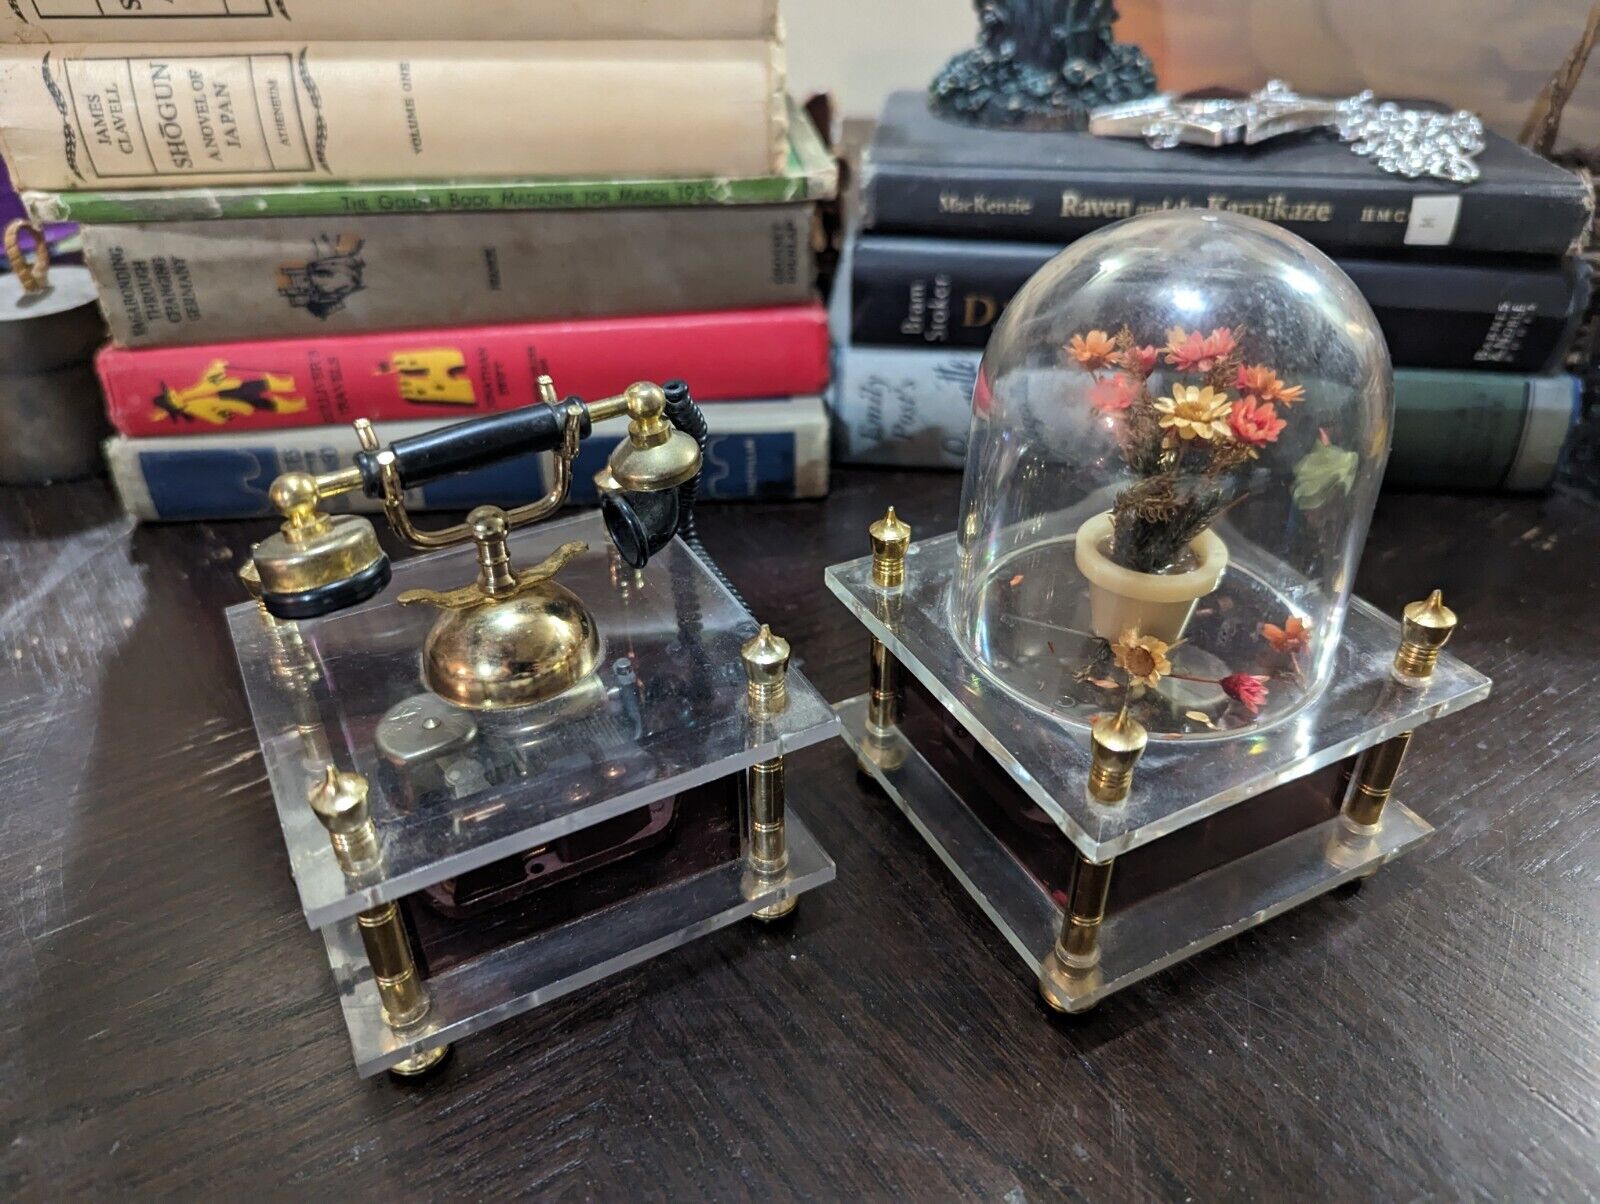 Vintage Waco Japan Music Boxes, Flower Pot And Telephone, Both Working